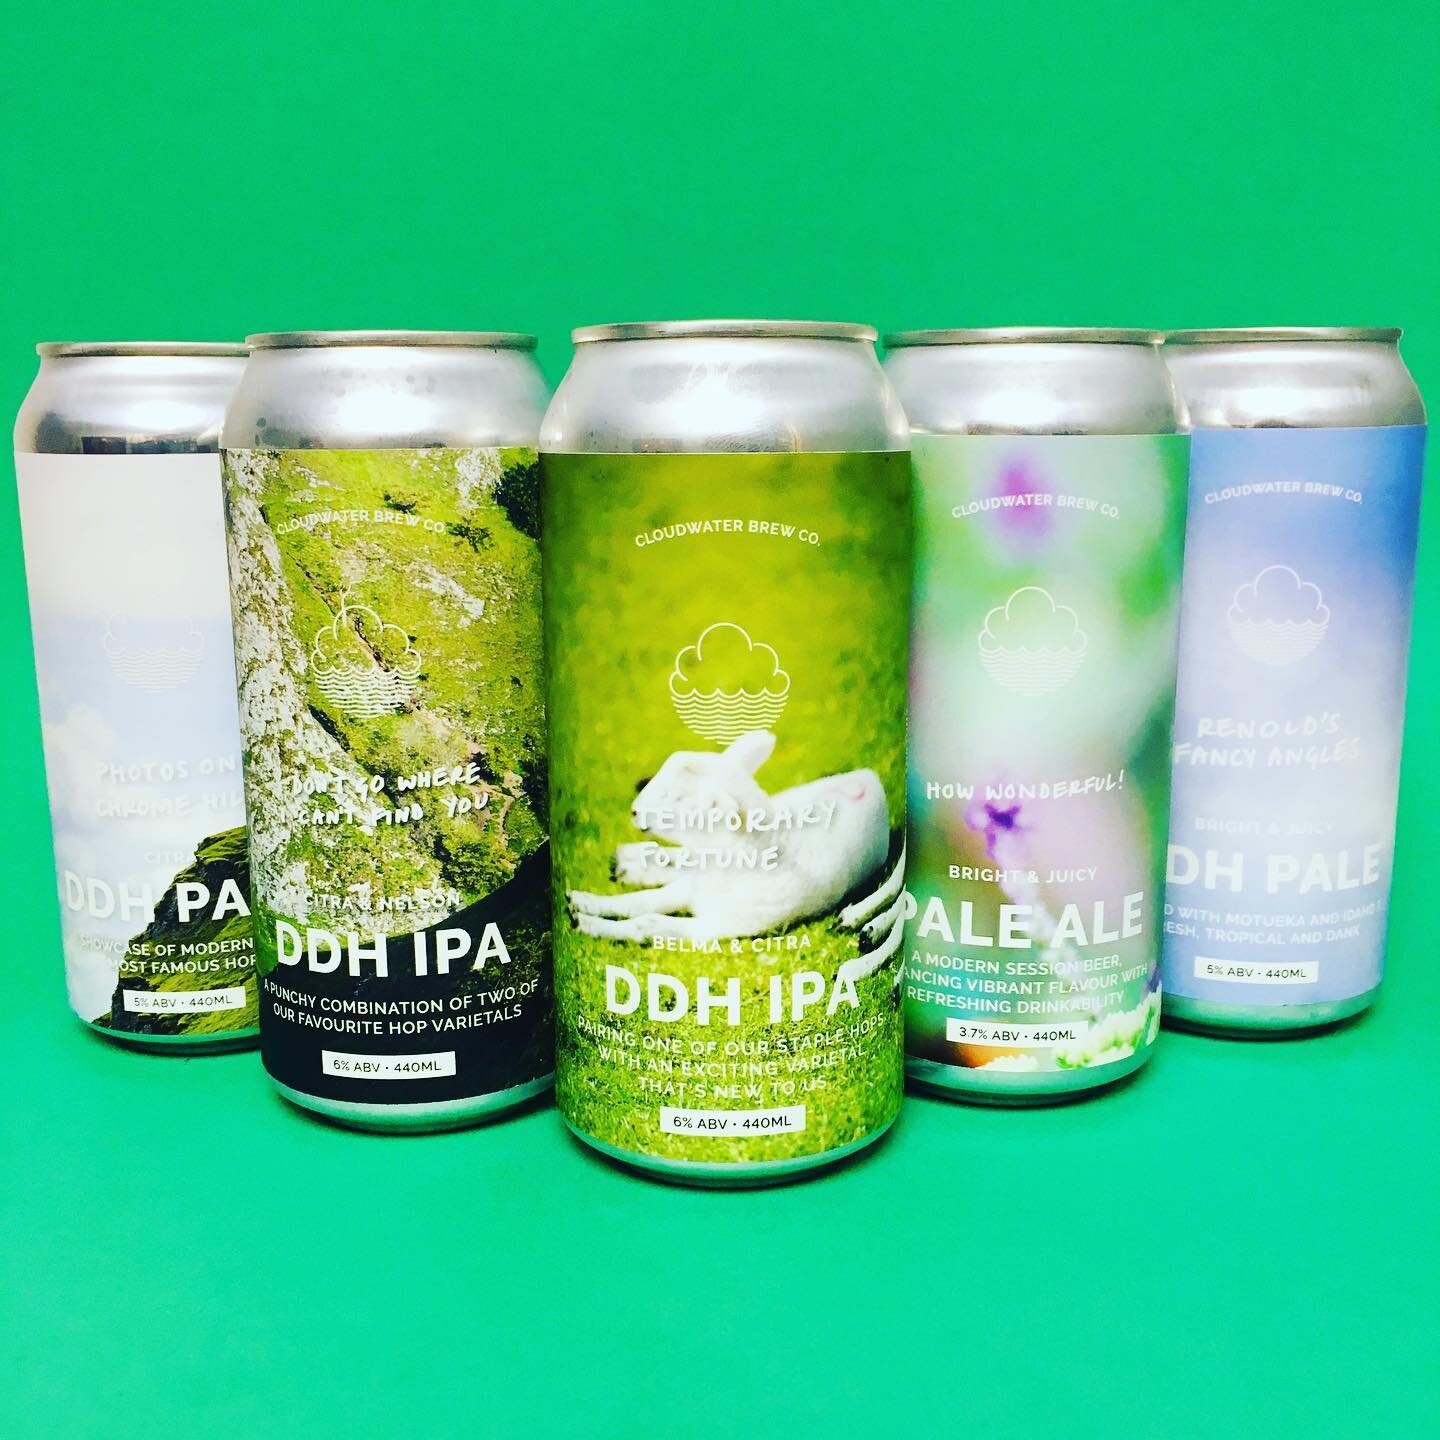 @cloudwaterbrew are back in stock with their latest batch of Pales &amp; IPAs

Don&rsquo;t let the earthy nature of these can designs fool you, they&rsquo;re going back to basics and concentrating on amazing hop combinations.

Citra seems to be a dom